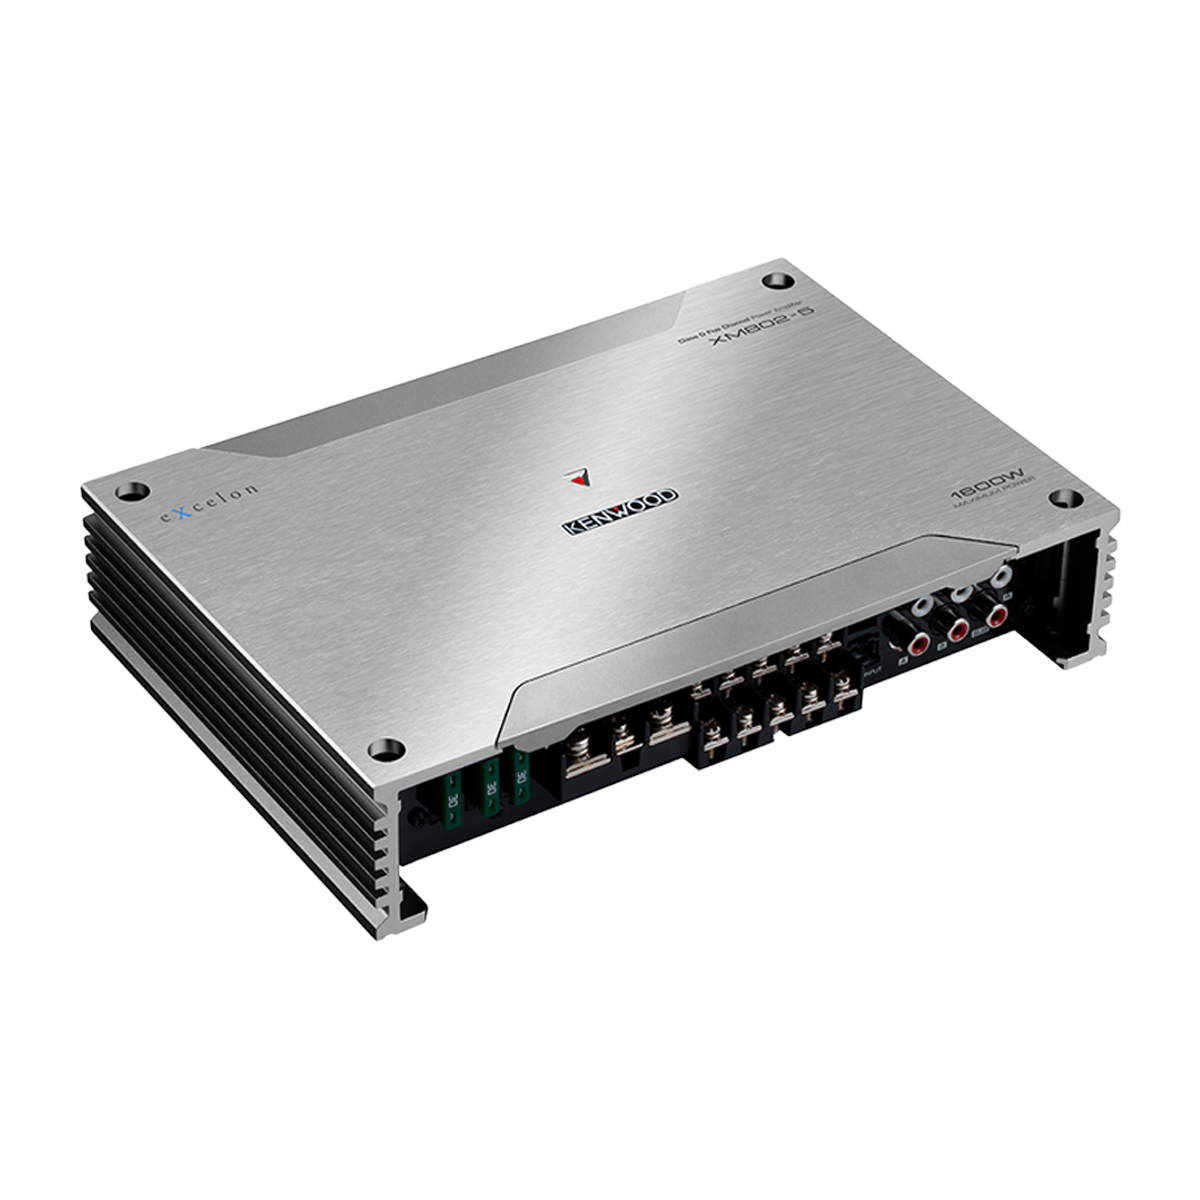 Introducing the eXcelon XM802-5 amplifier